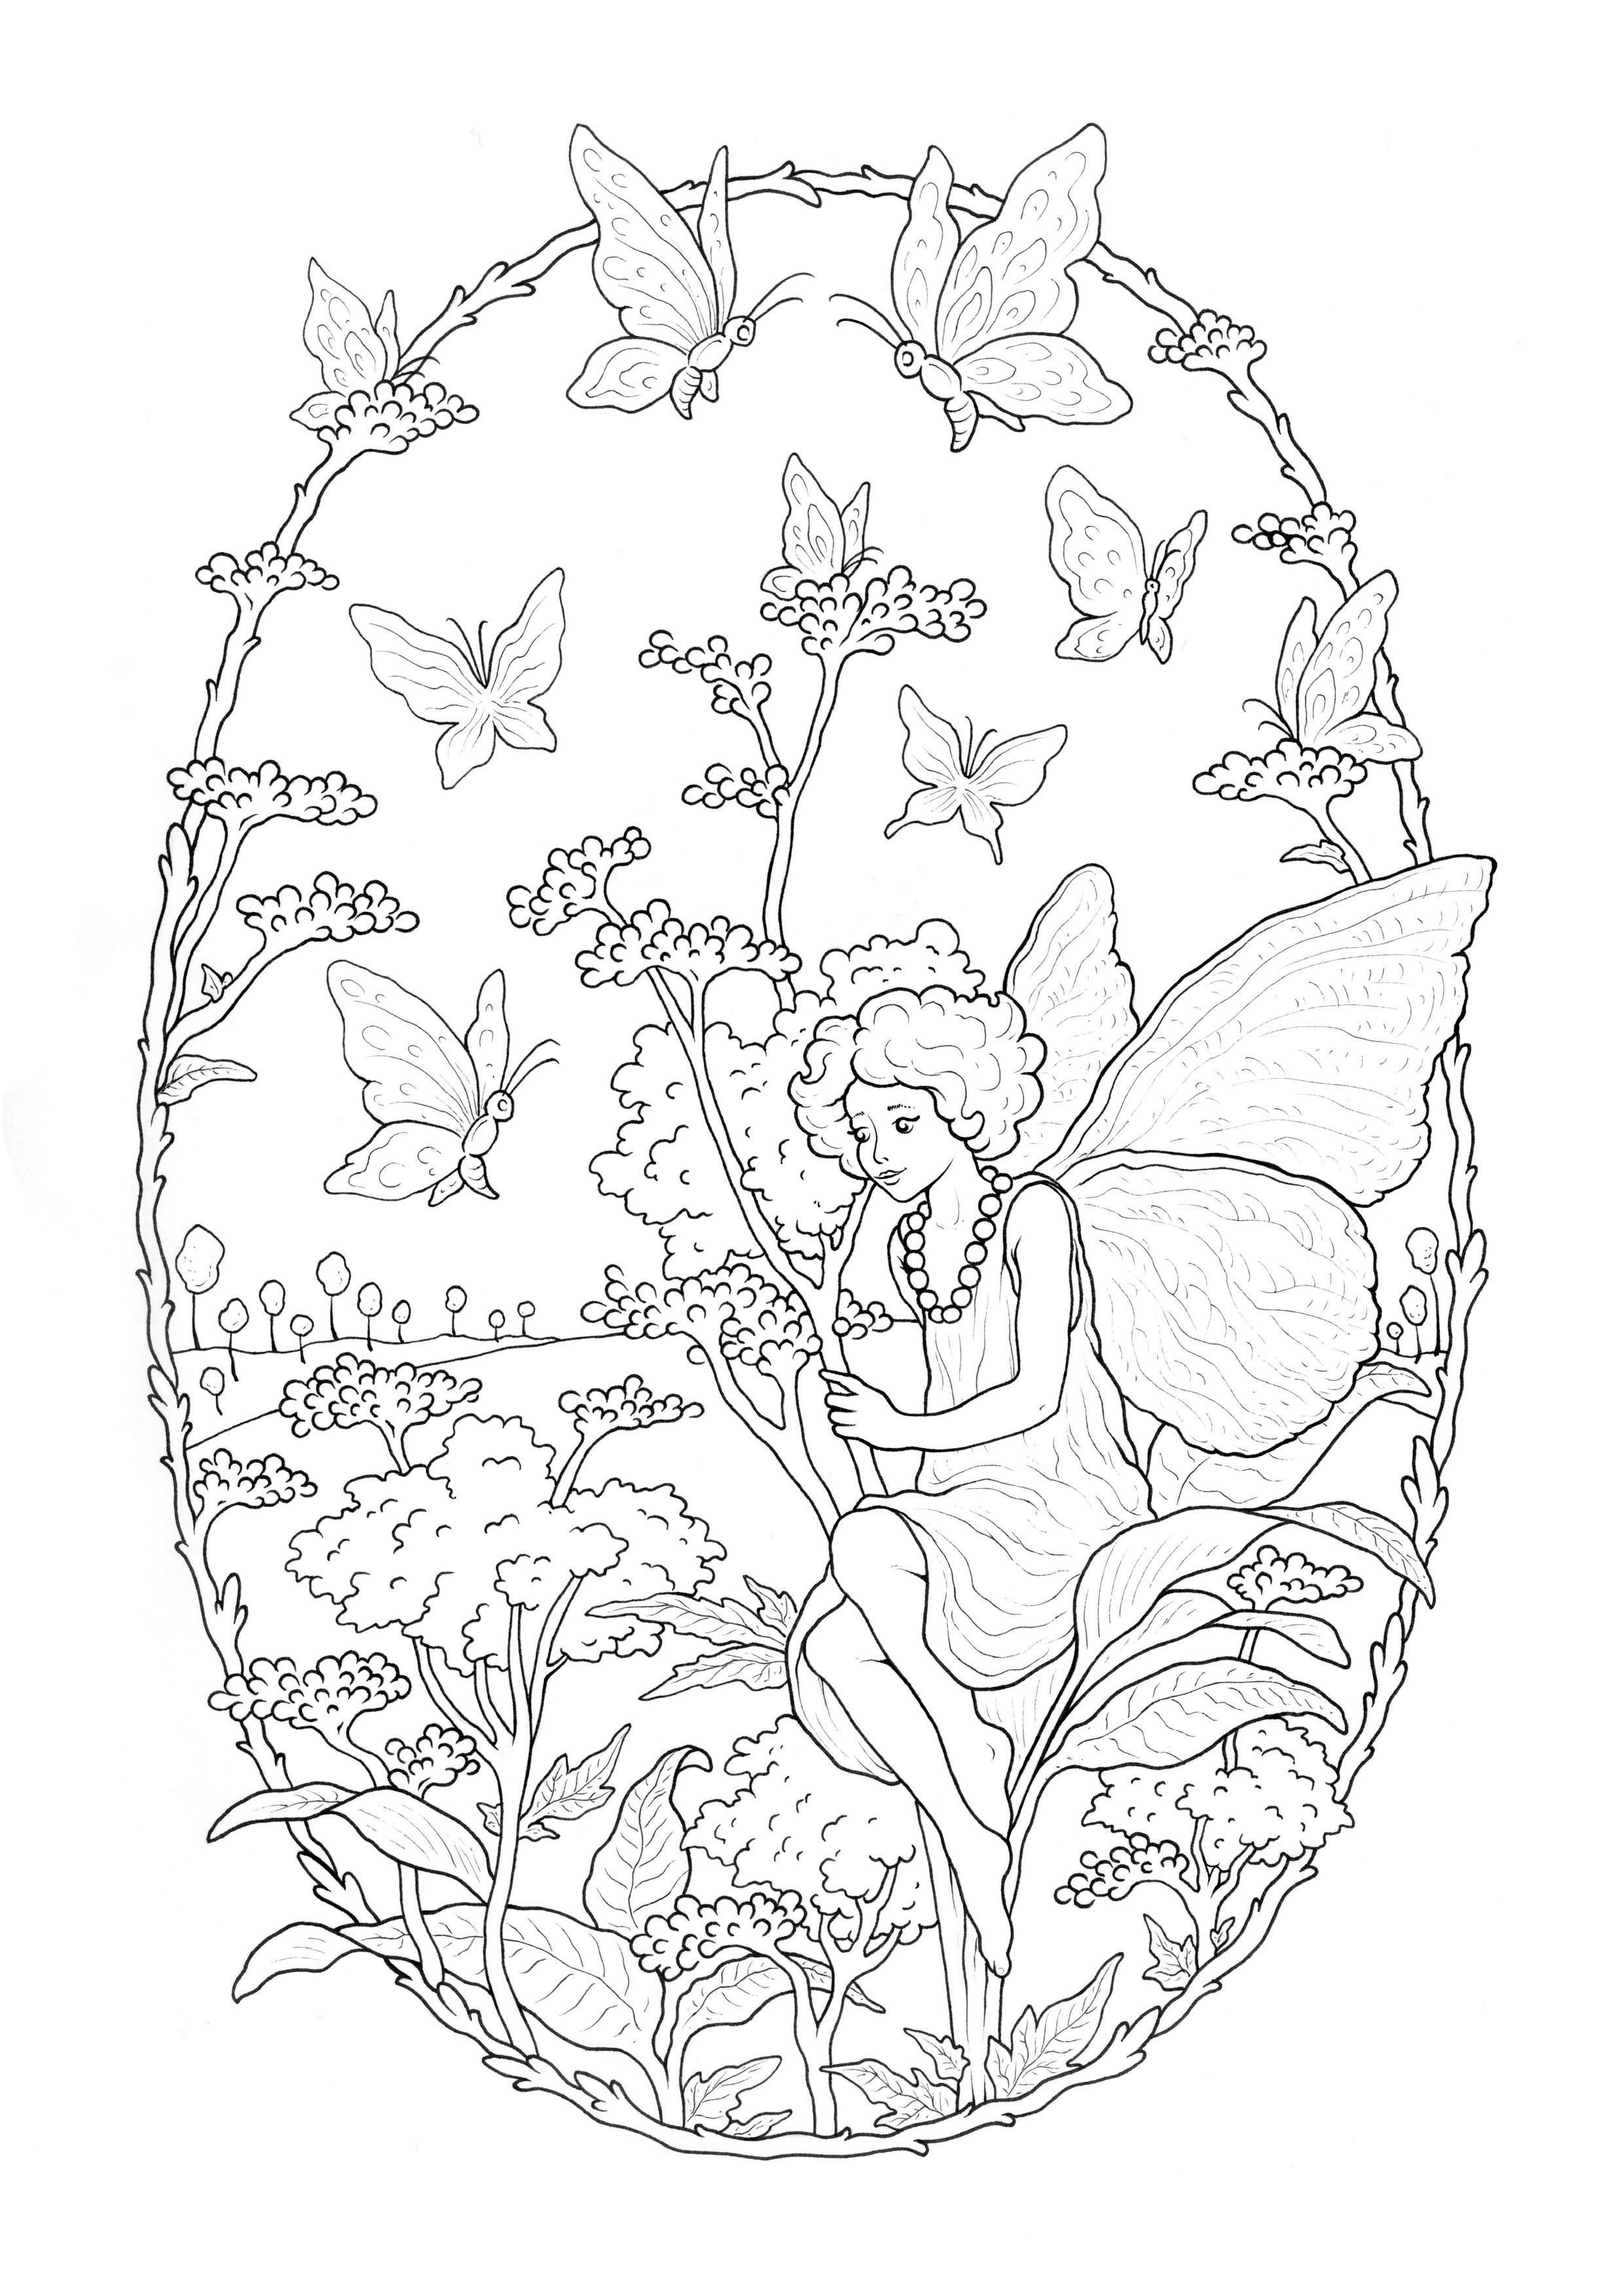 Simple Fairy coloring page for kids